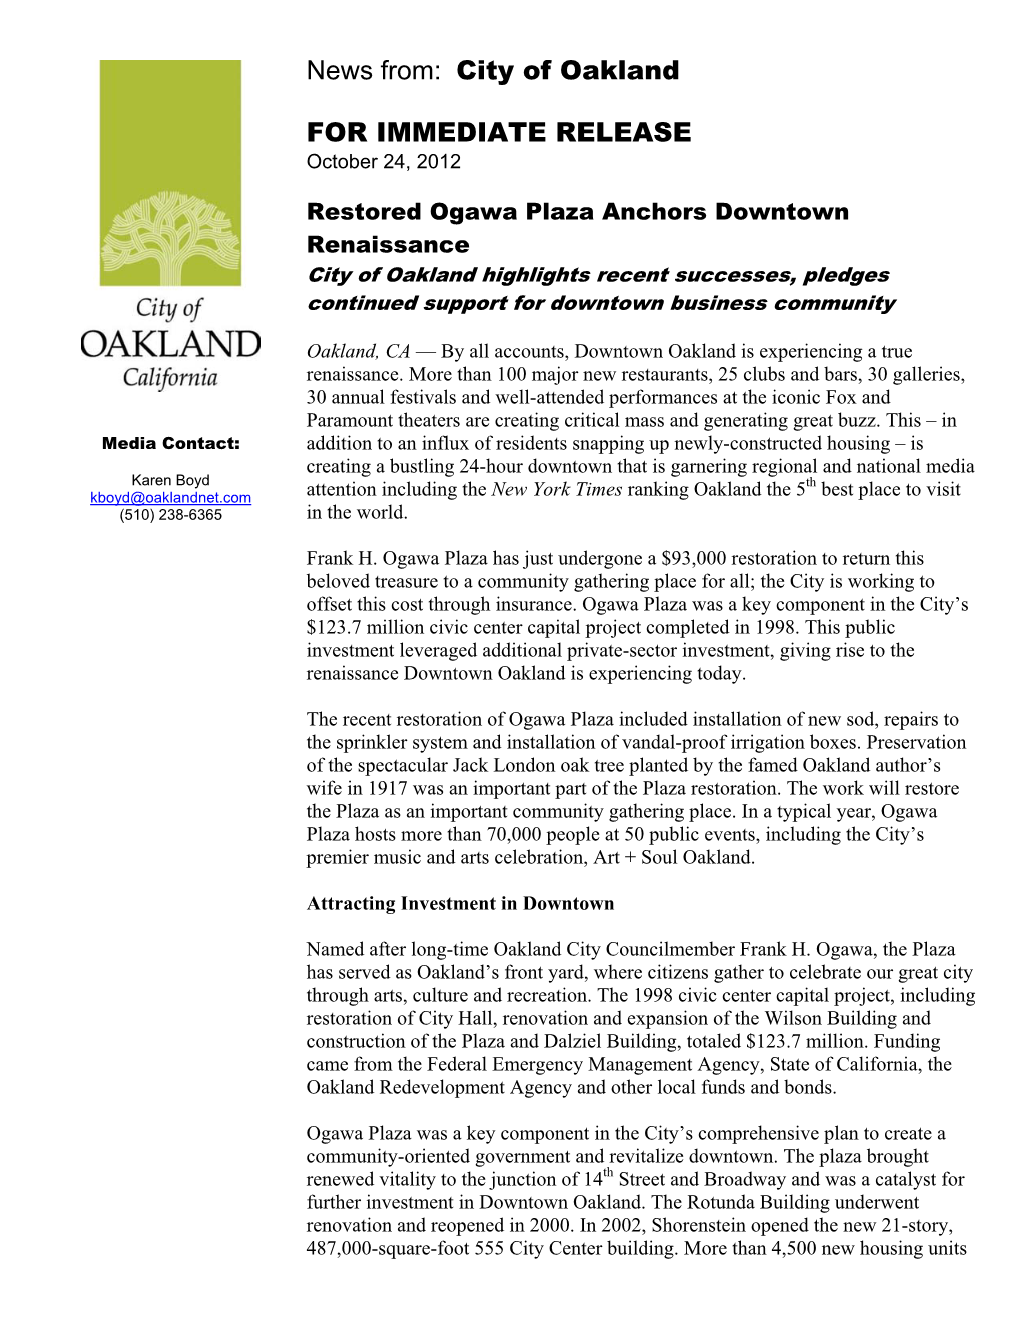 Restored Ogawa Plaza Anchors Downtown Renaissance City of Oakland Highlights Recent Successes, Pledges Continued Support for Downtown Business Community